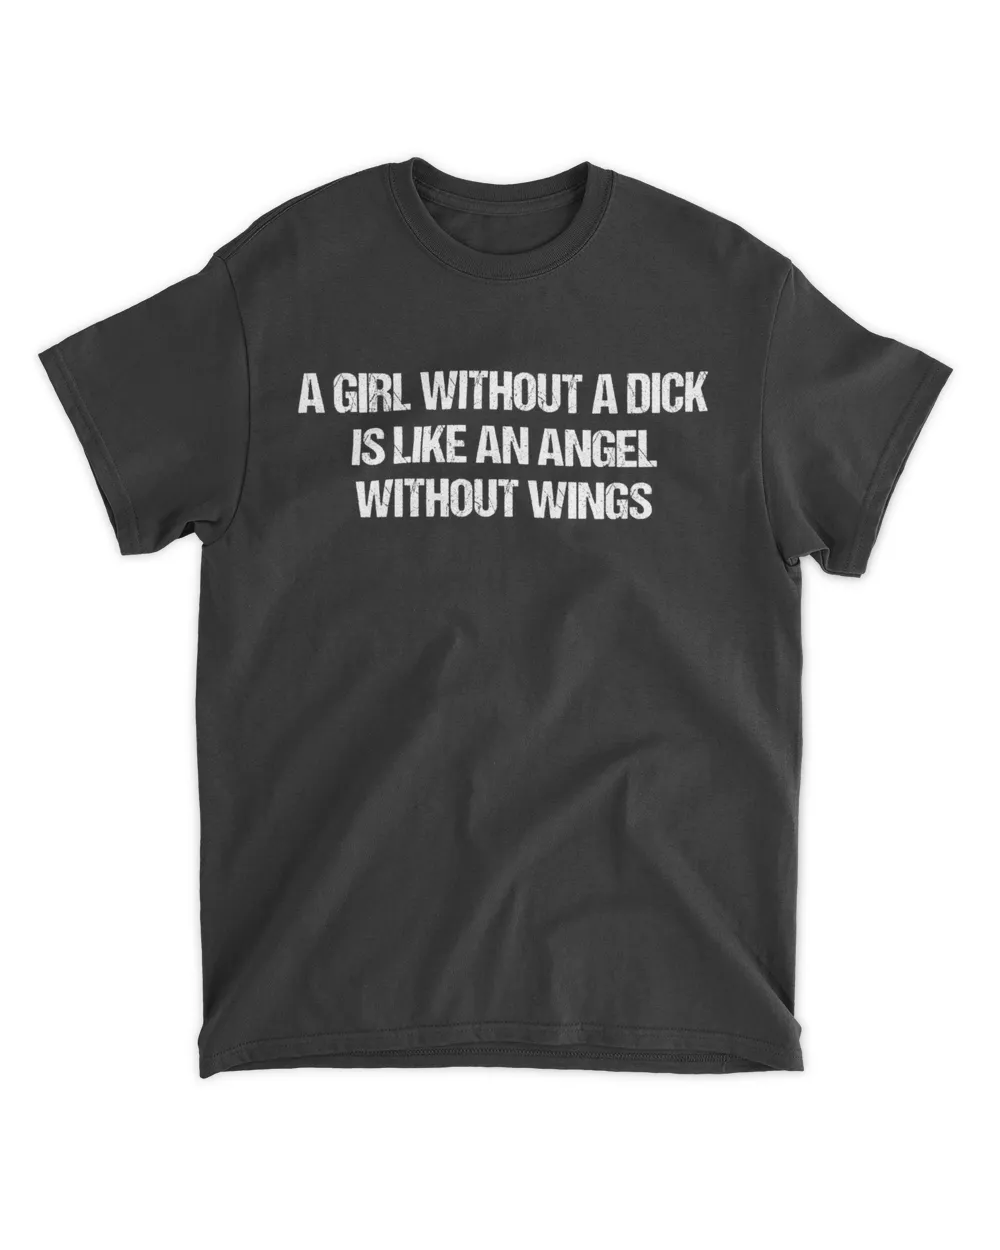 A girl without a dick is like an angel without wings vintage shirt, Jaclyn Moore Shirt, Trending Shirt, Girl Without A Dick Shirt